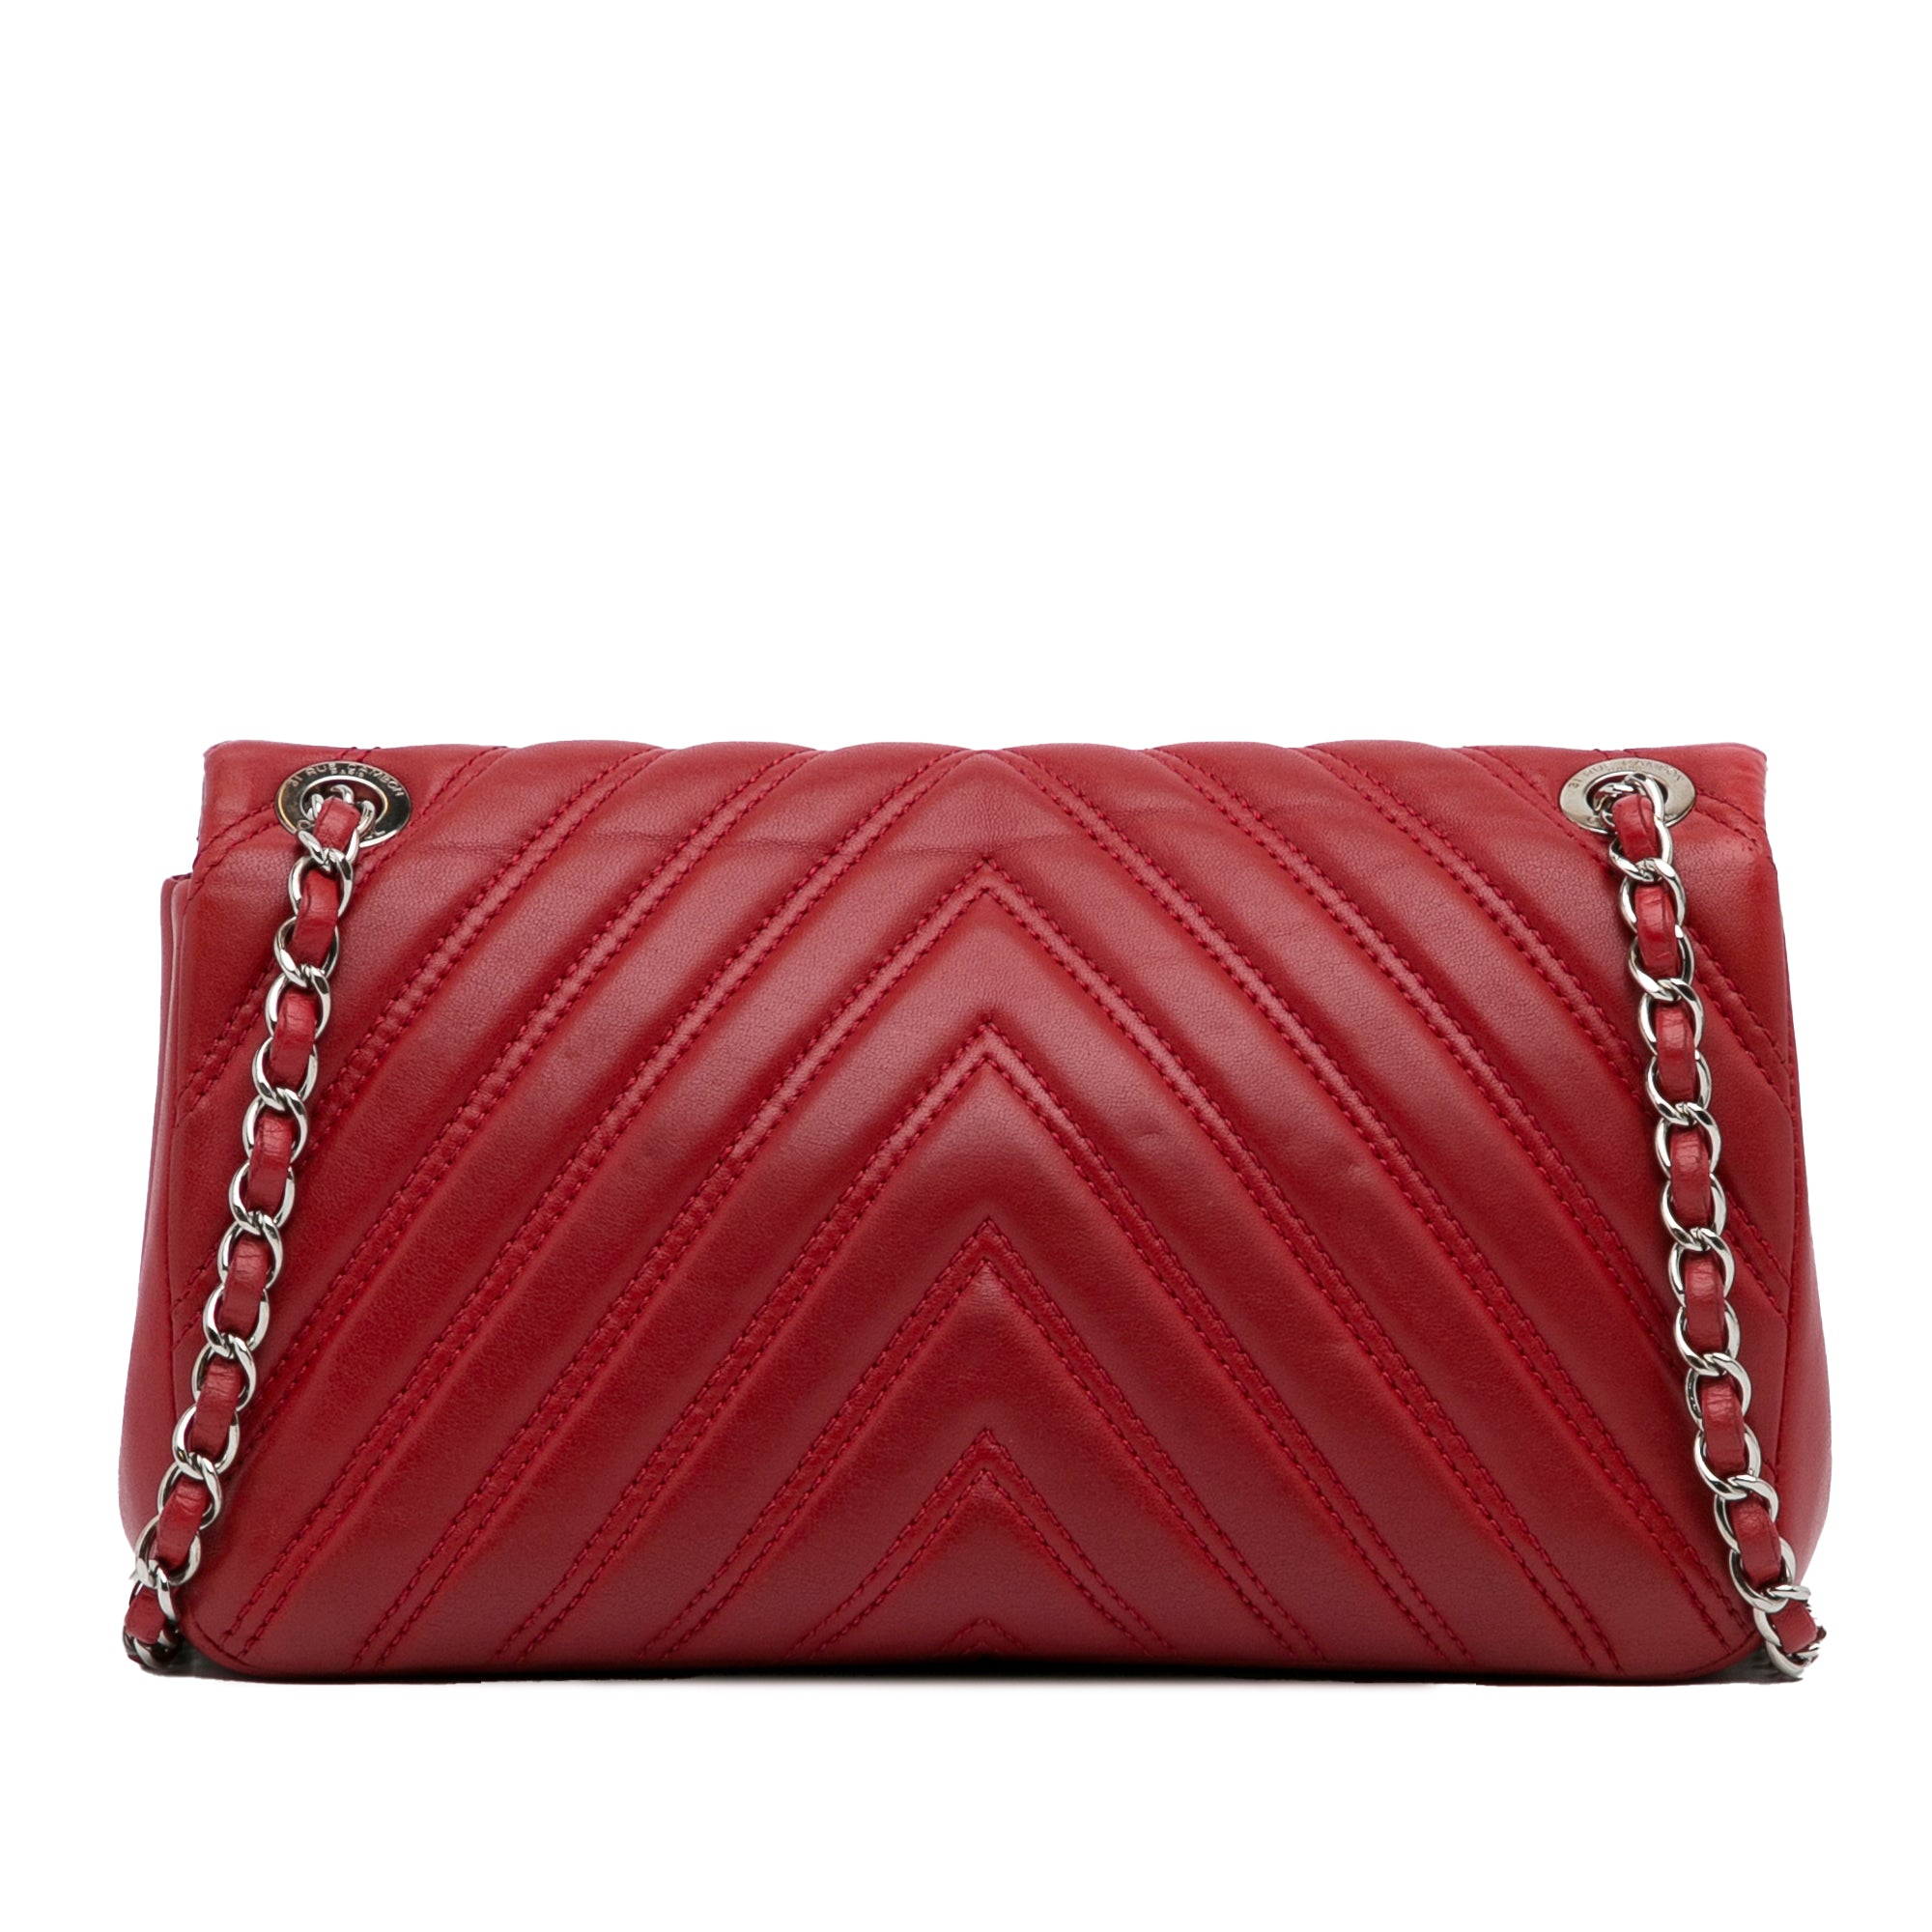 Red Chanel Mini Chevron Quilted Lambskin Rectangular Flap Bag